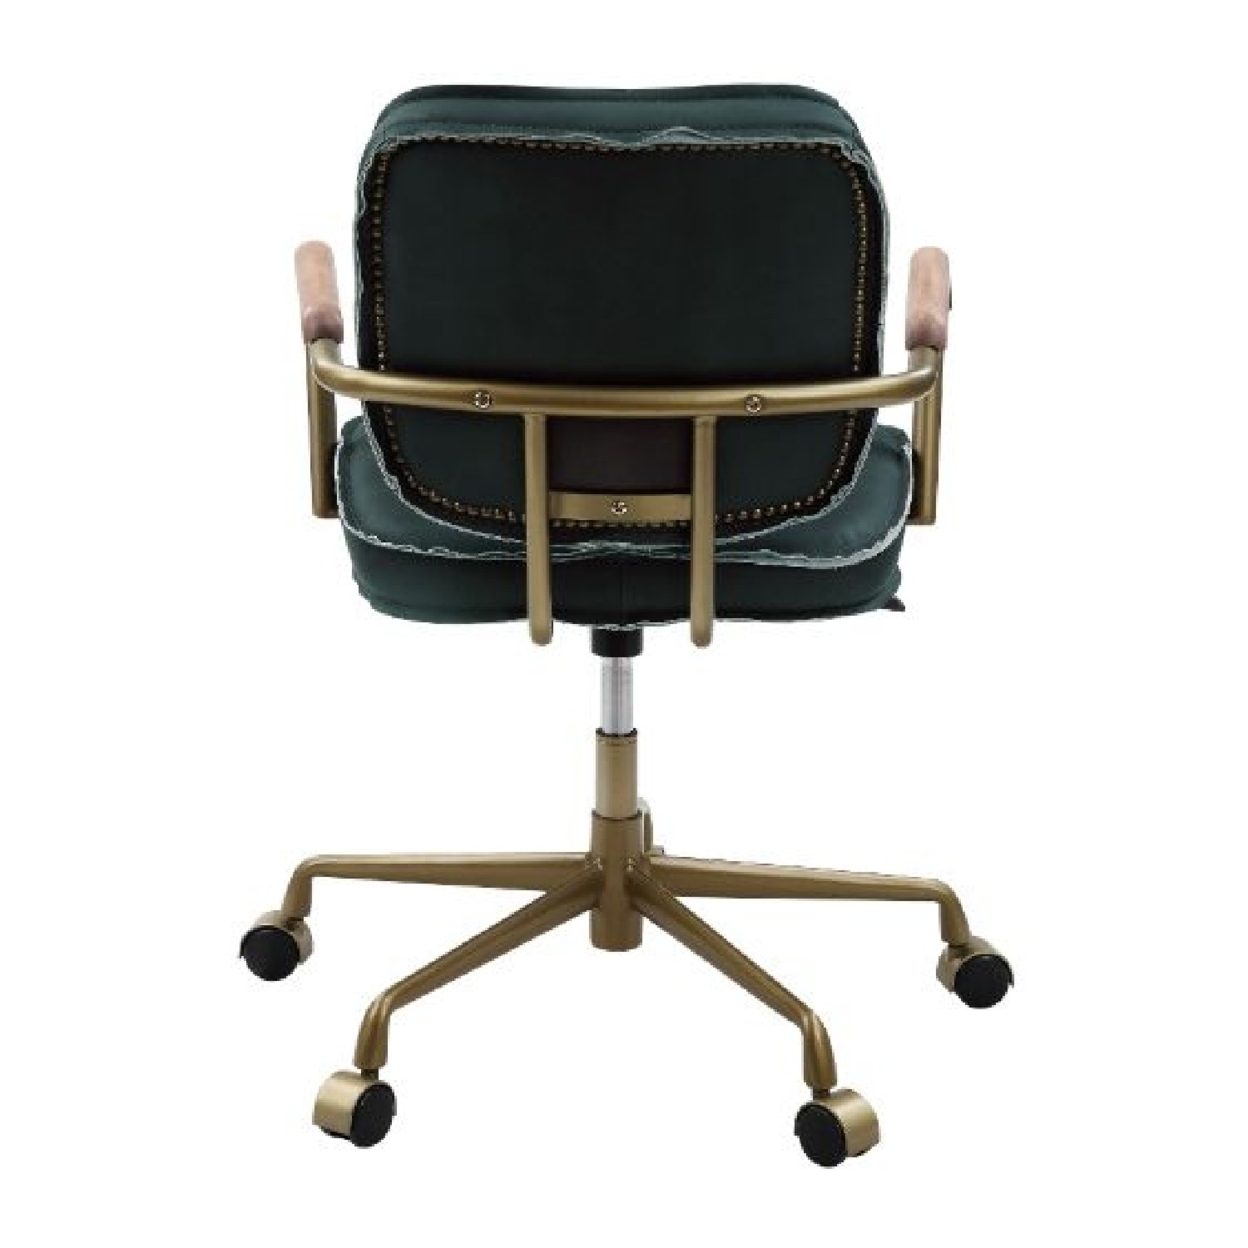 Office Chair With Leather Seat And Button Tufted Back, Green- Saltoro Sherpi